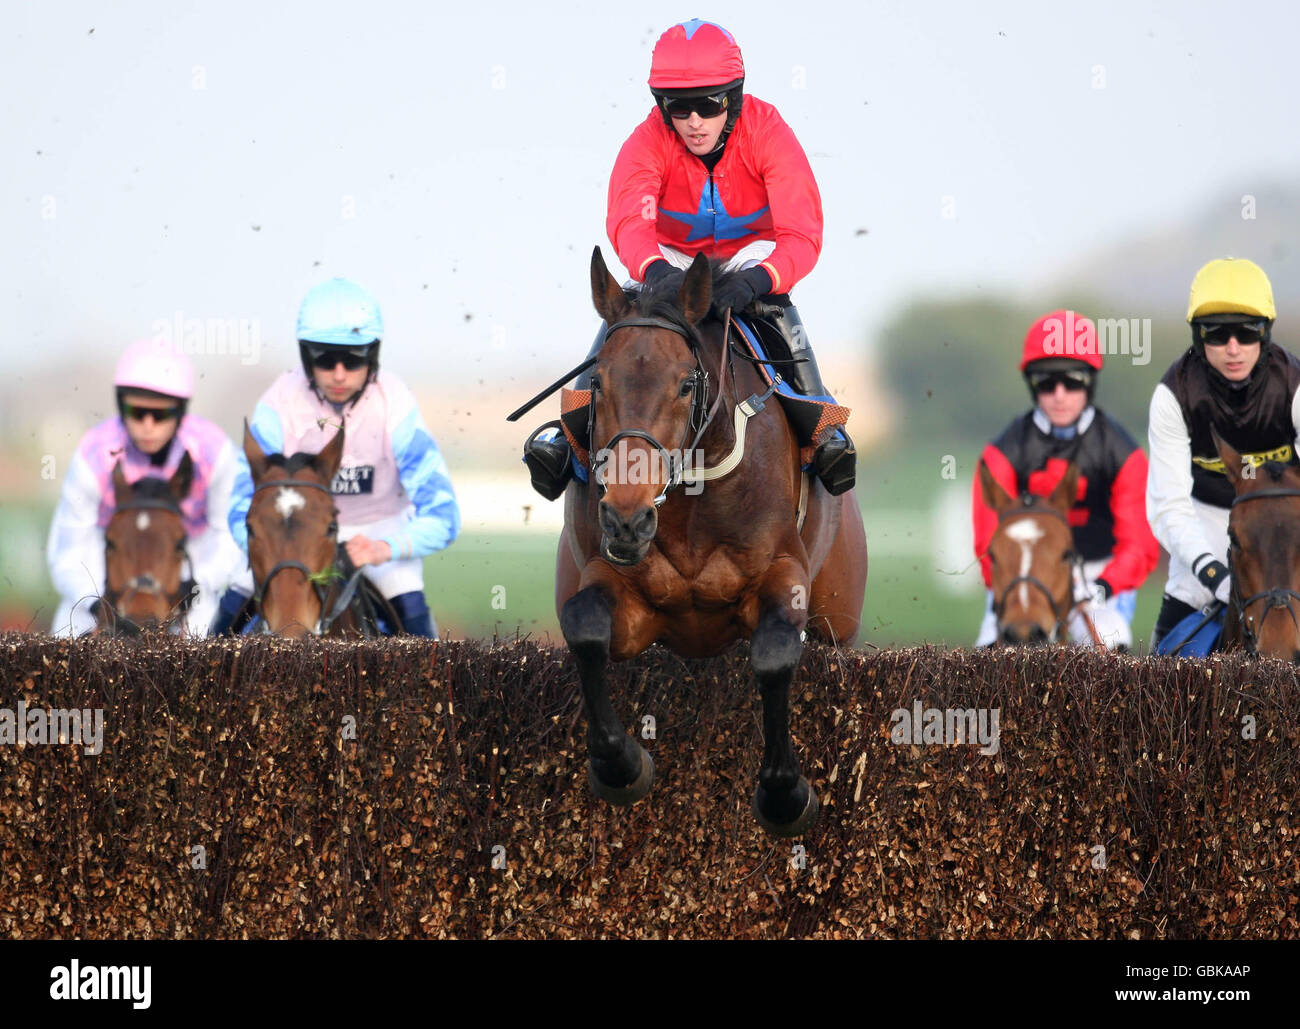 Theboyfrombulawayo ridden by Jason Maguire (centre) in the Opin Systems Claiming Chase during Day One of the Coral Scottish Grand National Festival at Ayr Racecourse, Ayr. Stock Photo